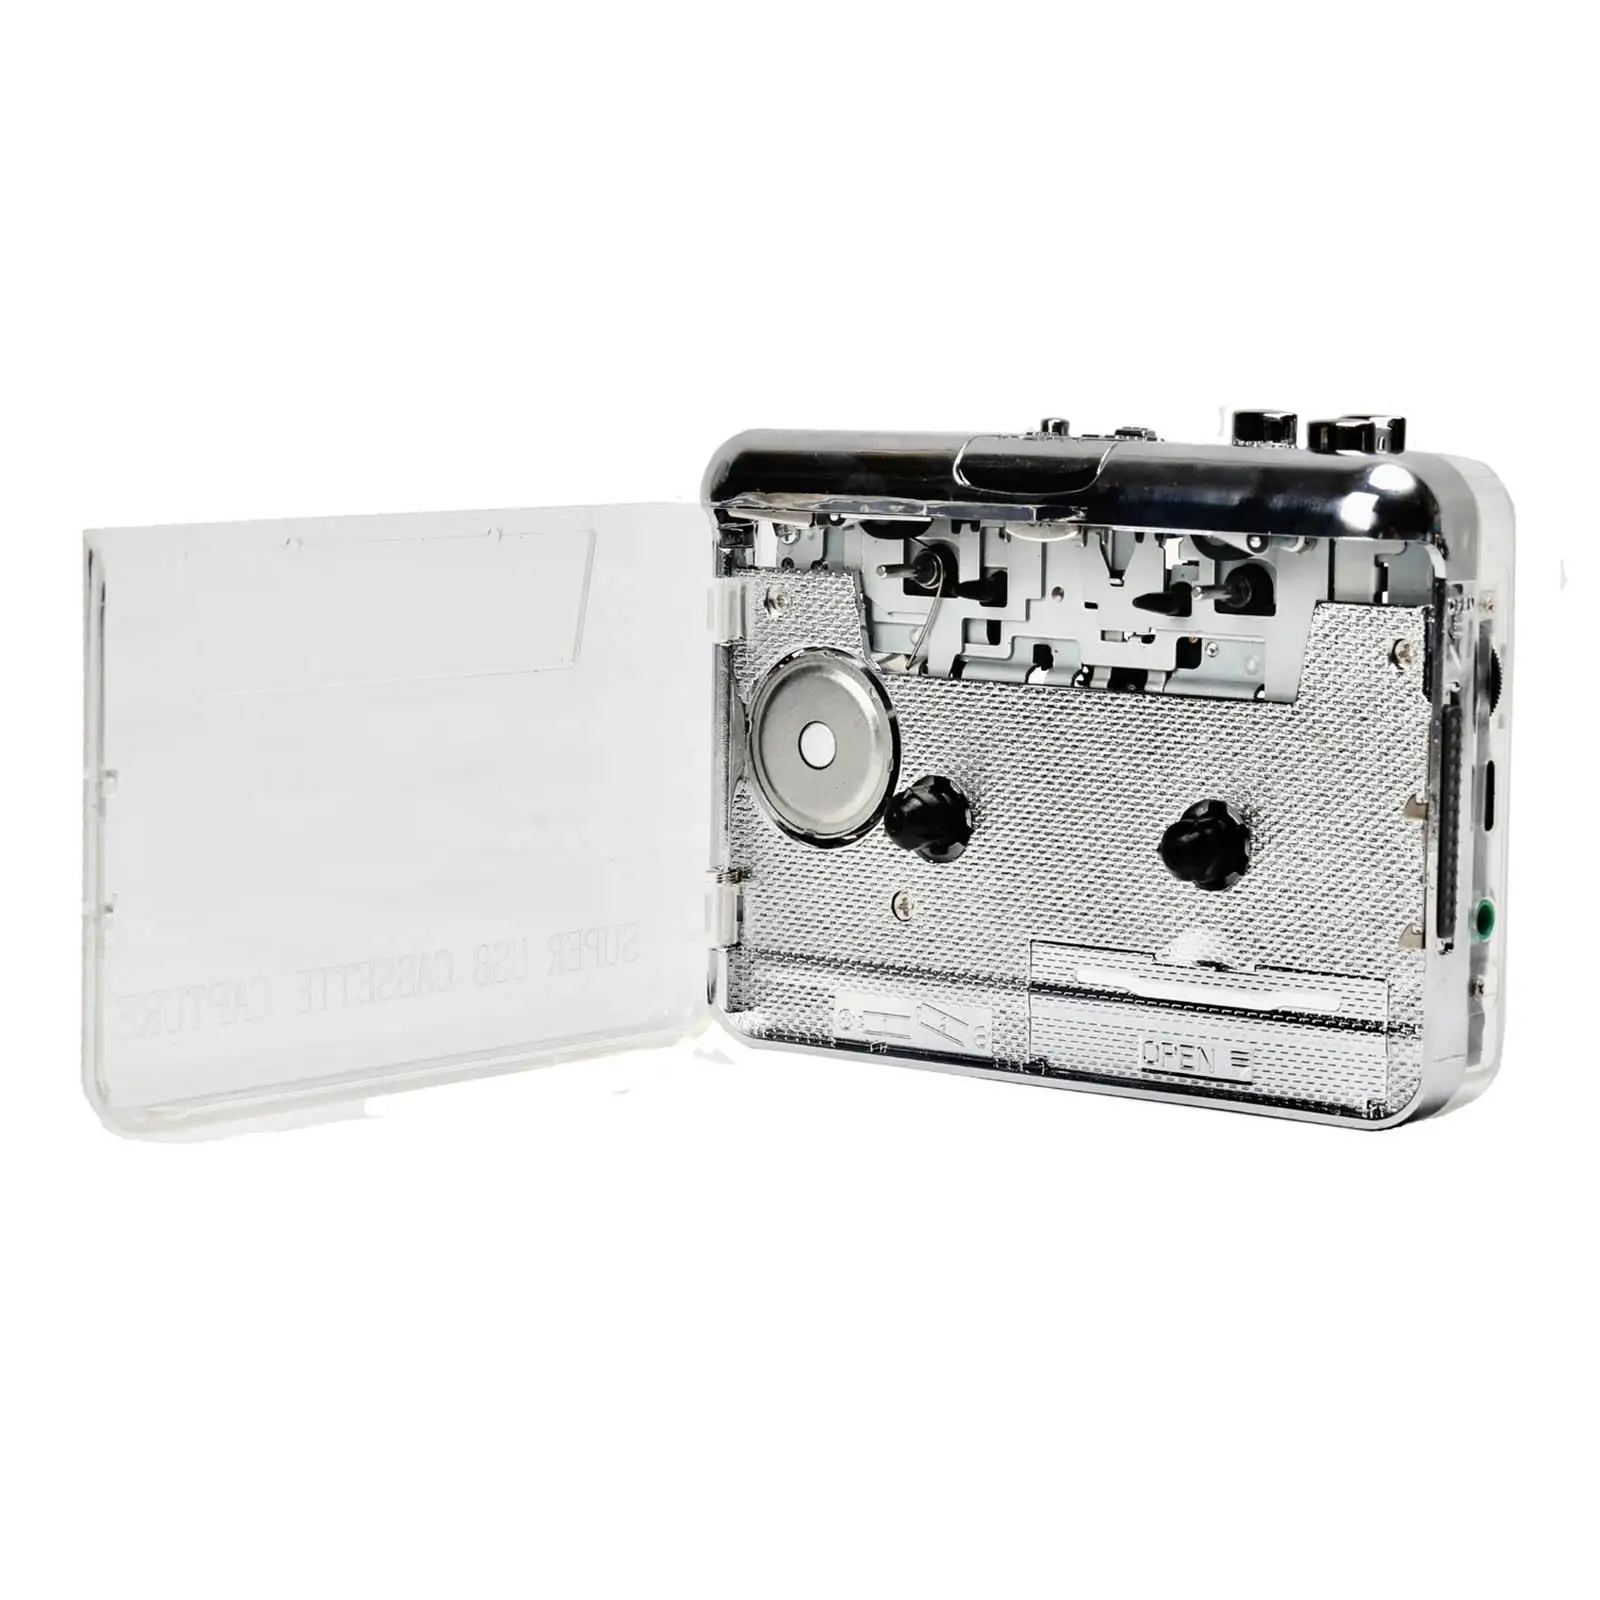 USB Cassette Tape to MP3 CD Cassette Player Powered by Battery or USB Portable Converter for Laptop PC Computers Audio Via USB